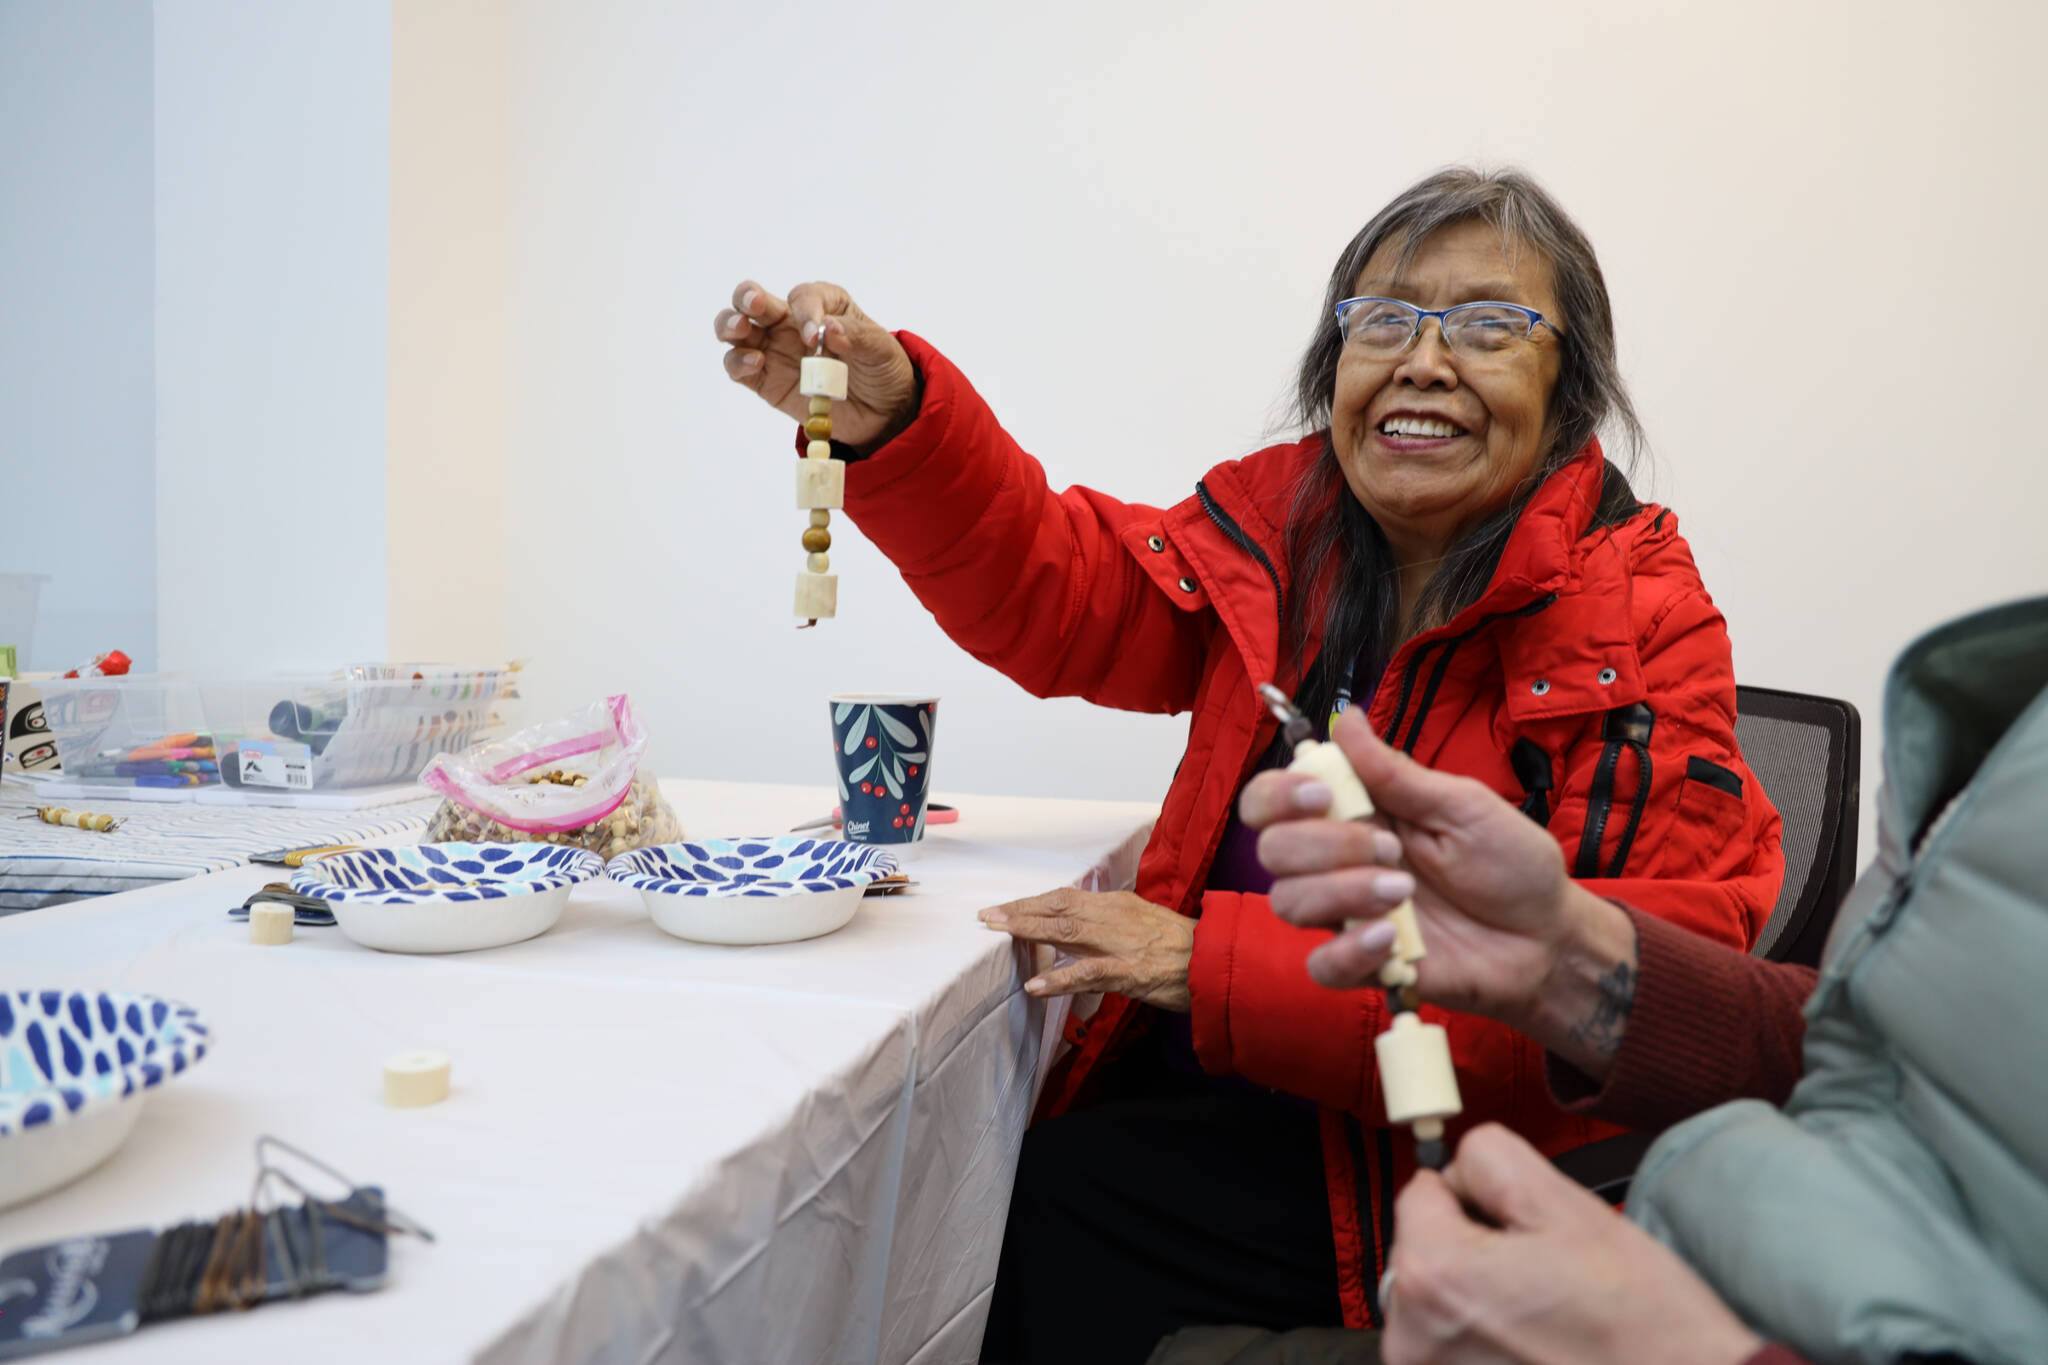 Leona Santiago smiles while holding a beaded key chain made with devil’s club during a celebration of the winter solstice on Wednesday afternoon at Generations Southeast. According to David Abad, a volunteer at the event who supplied the plant, Devil’s club often represents protection in Alaska Native cultures. (Clarise Larson / Juneau Empire)